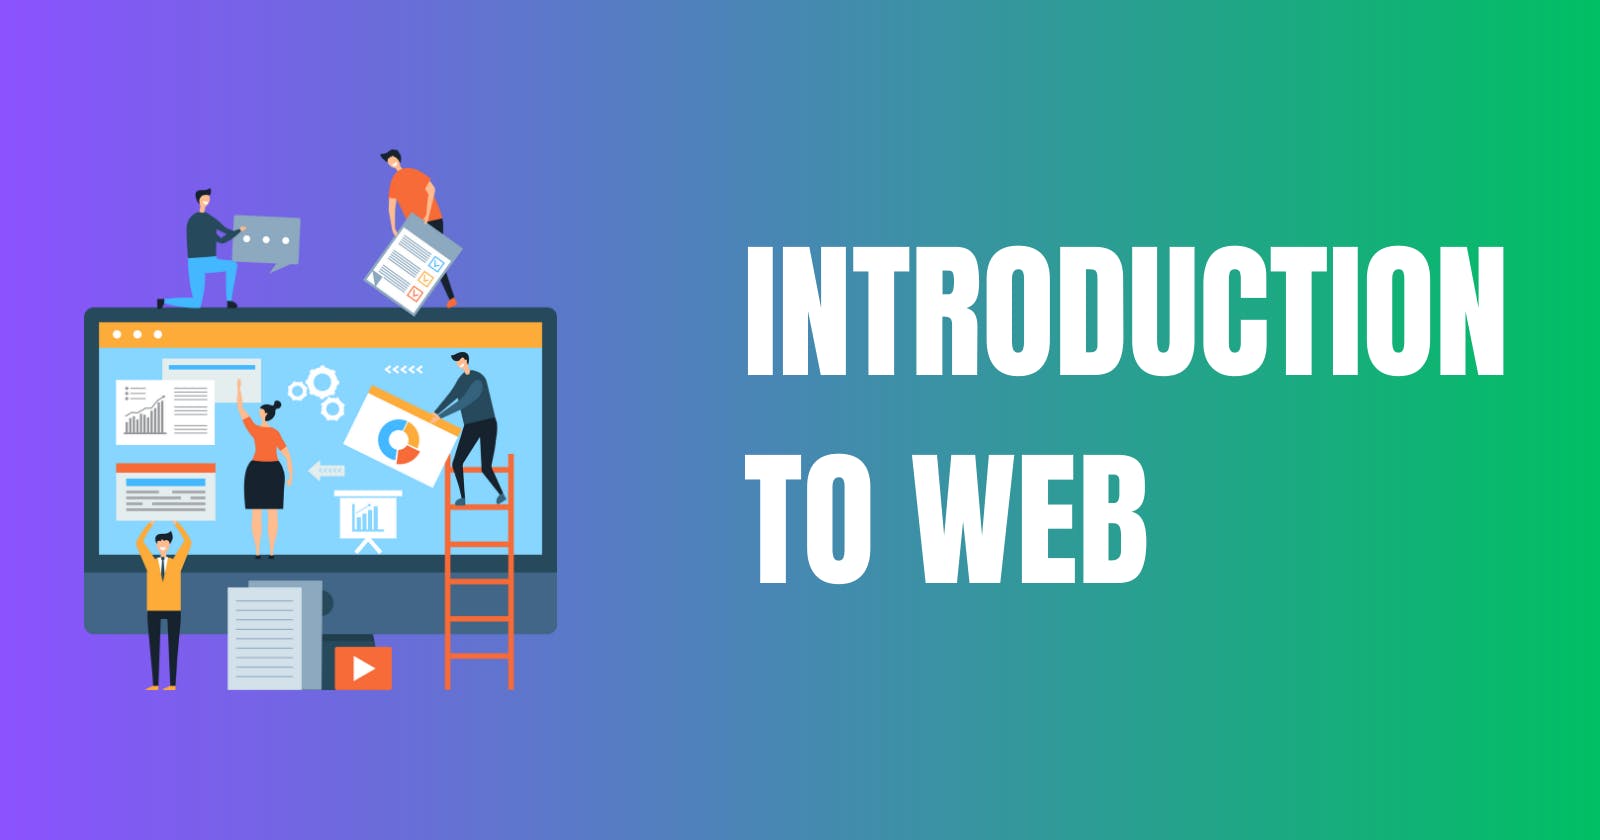 Introduction to web and html